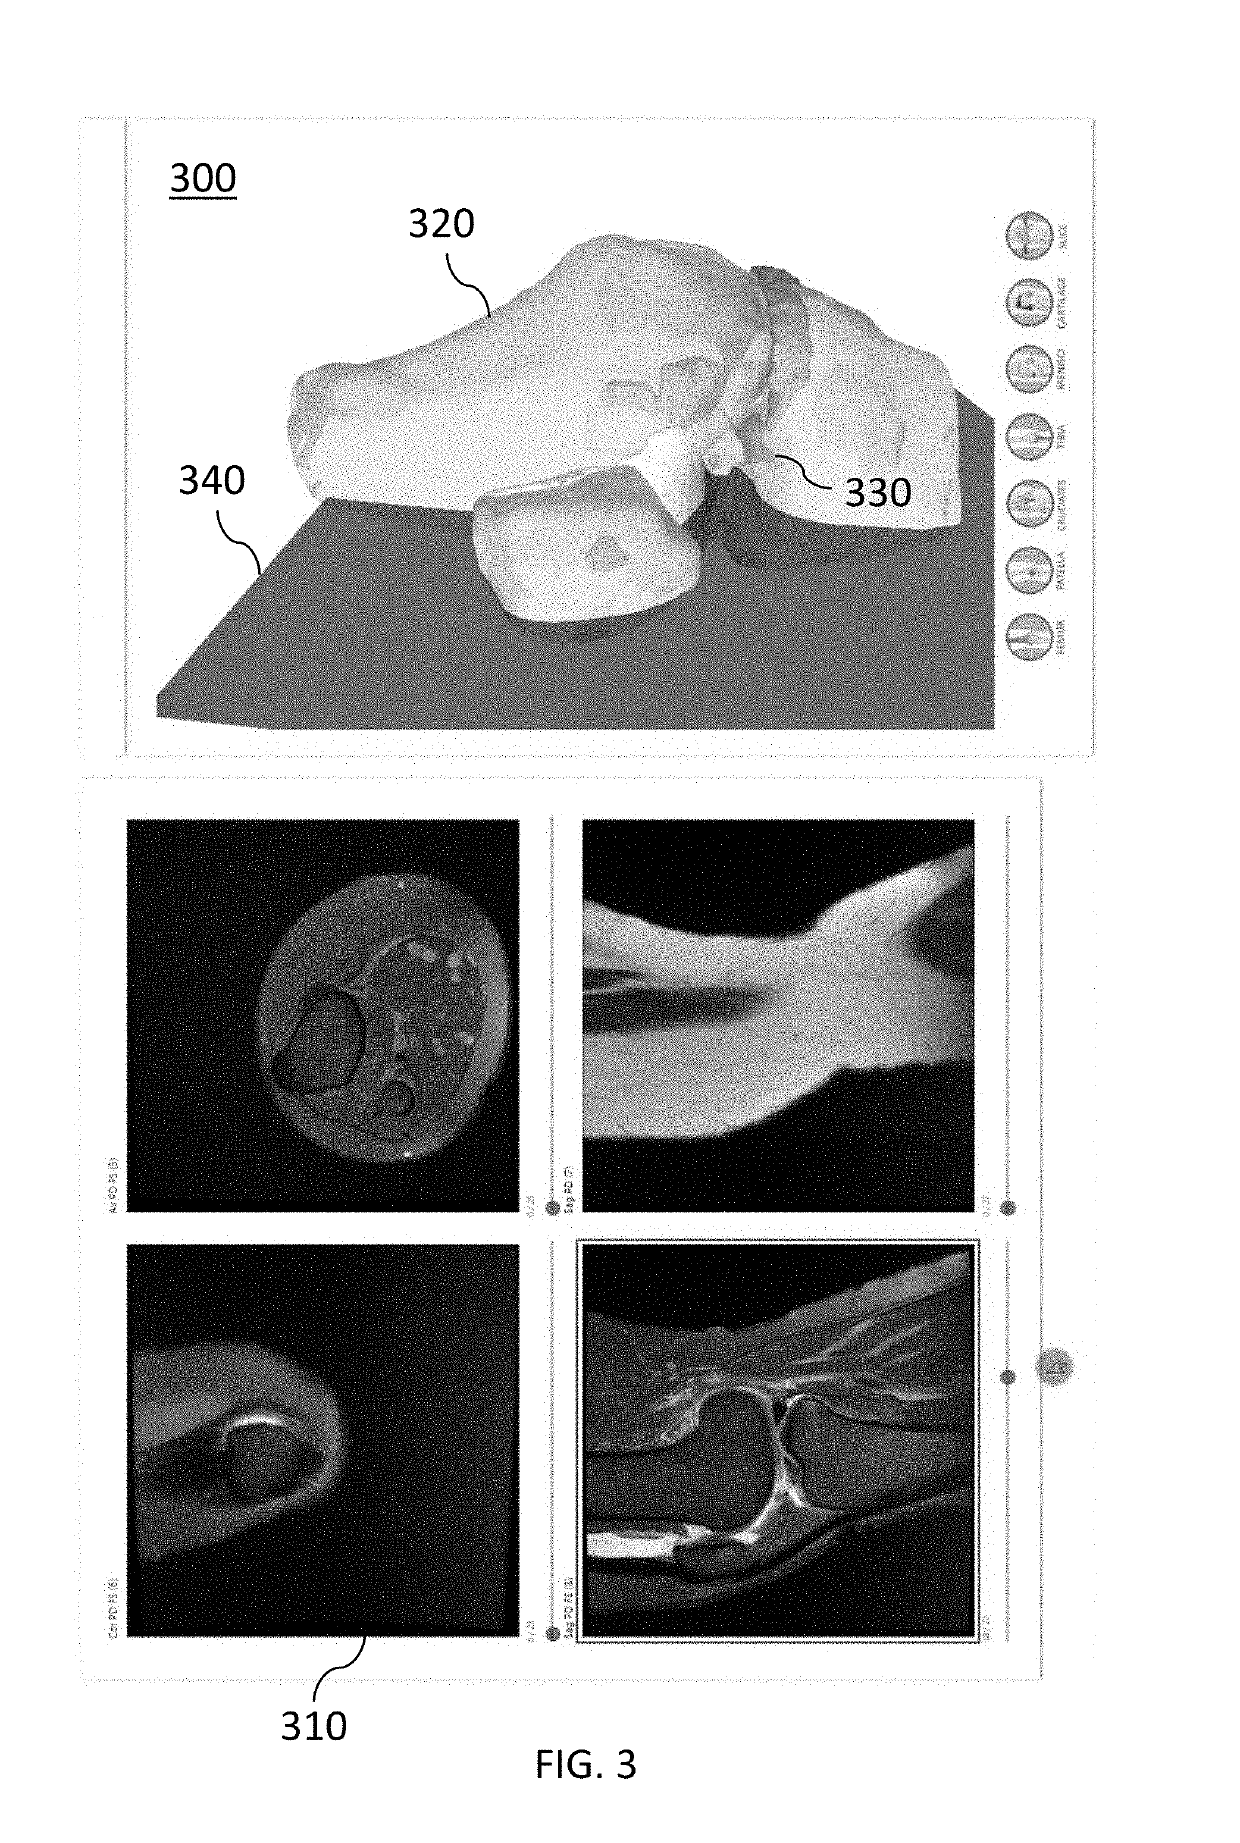 Determination and visualization of damage to an anatomical joint